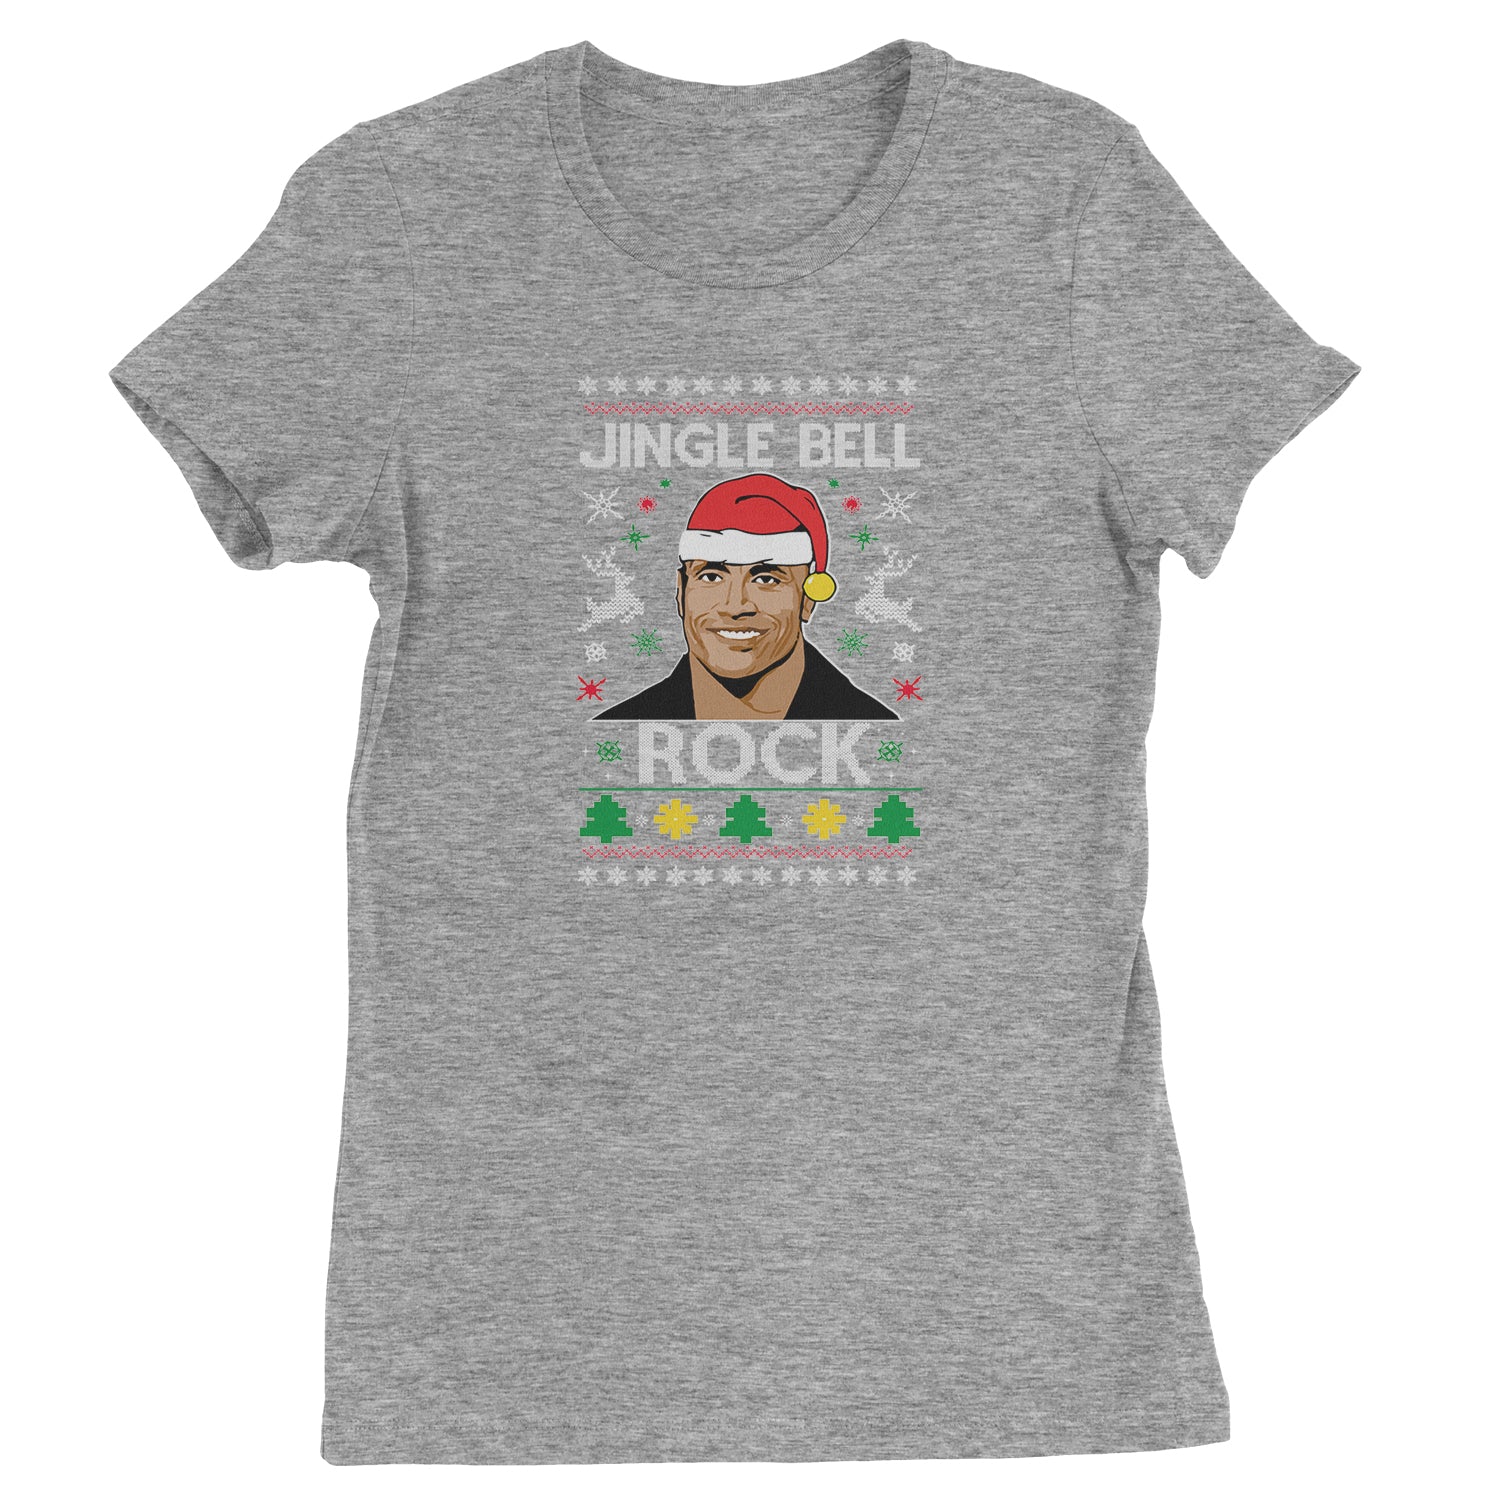 Jingle Bell Rock Ugly Christmas Womens T-shirt 2018, champ, Christmas, dwayne, johnson, peoples, rock, Sweatshirts, the, Ugly by Expression Tees